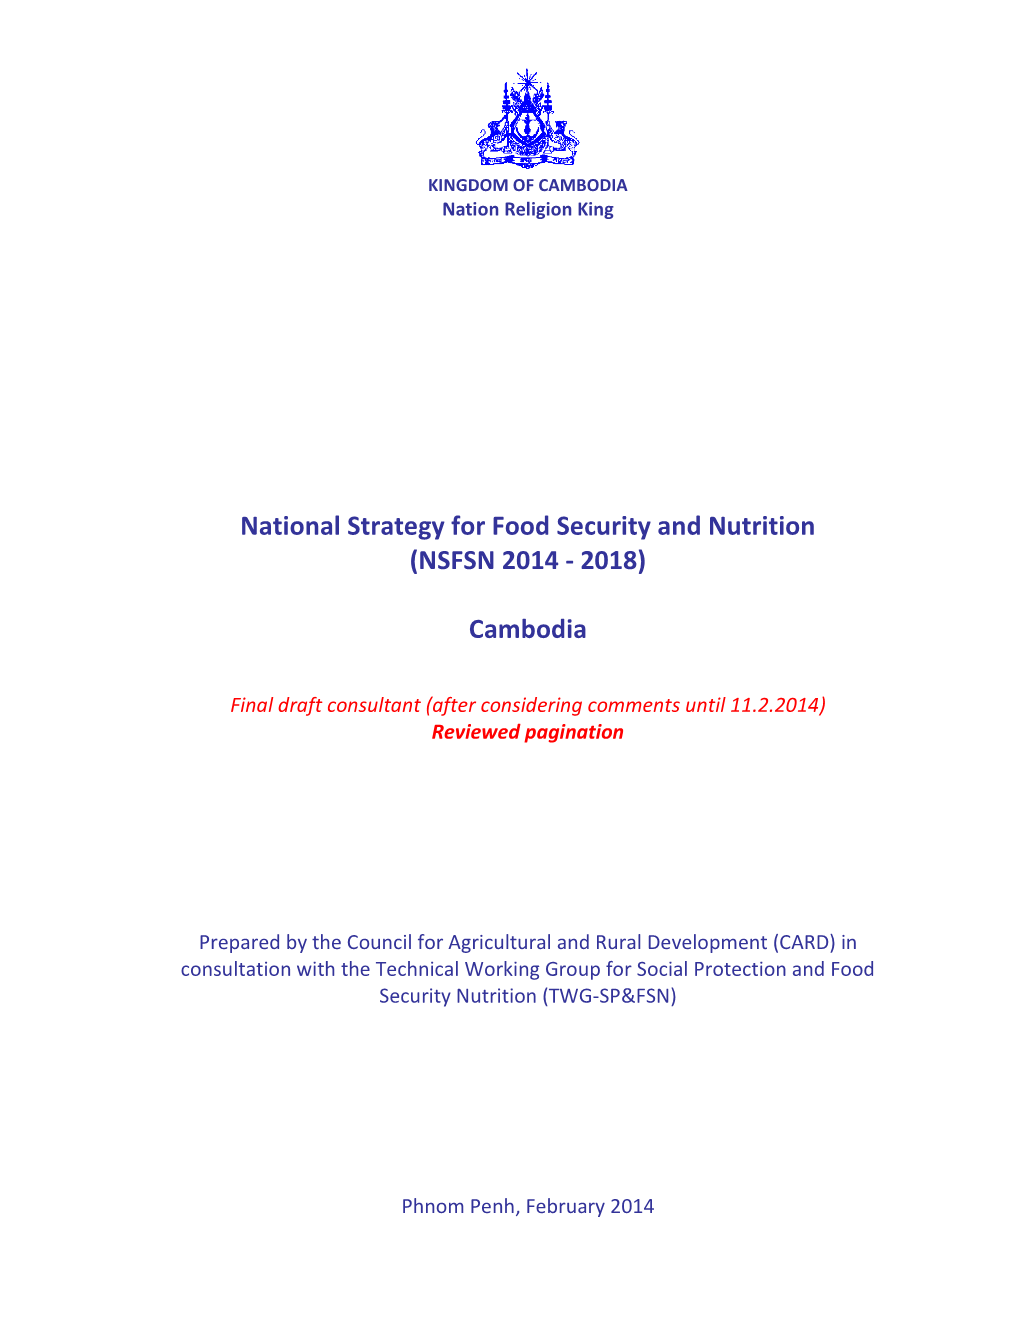 National Strategy for Food Security and Nutrition (NSFSN 2014 - 2018)